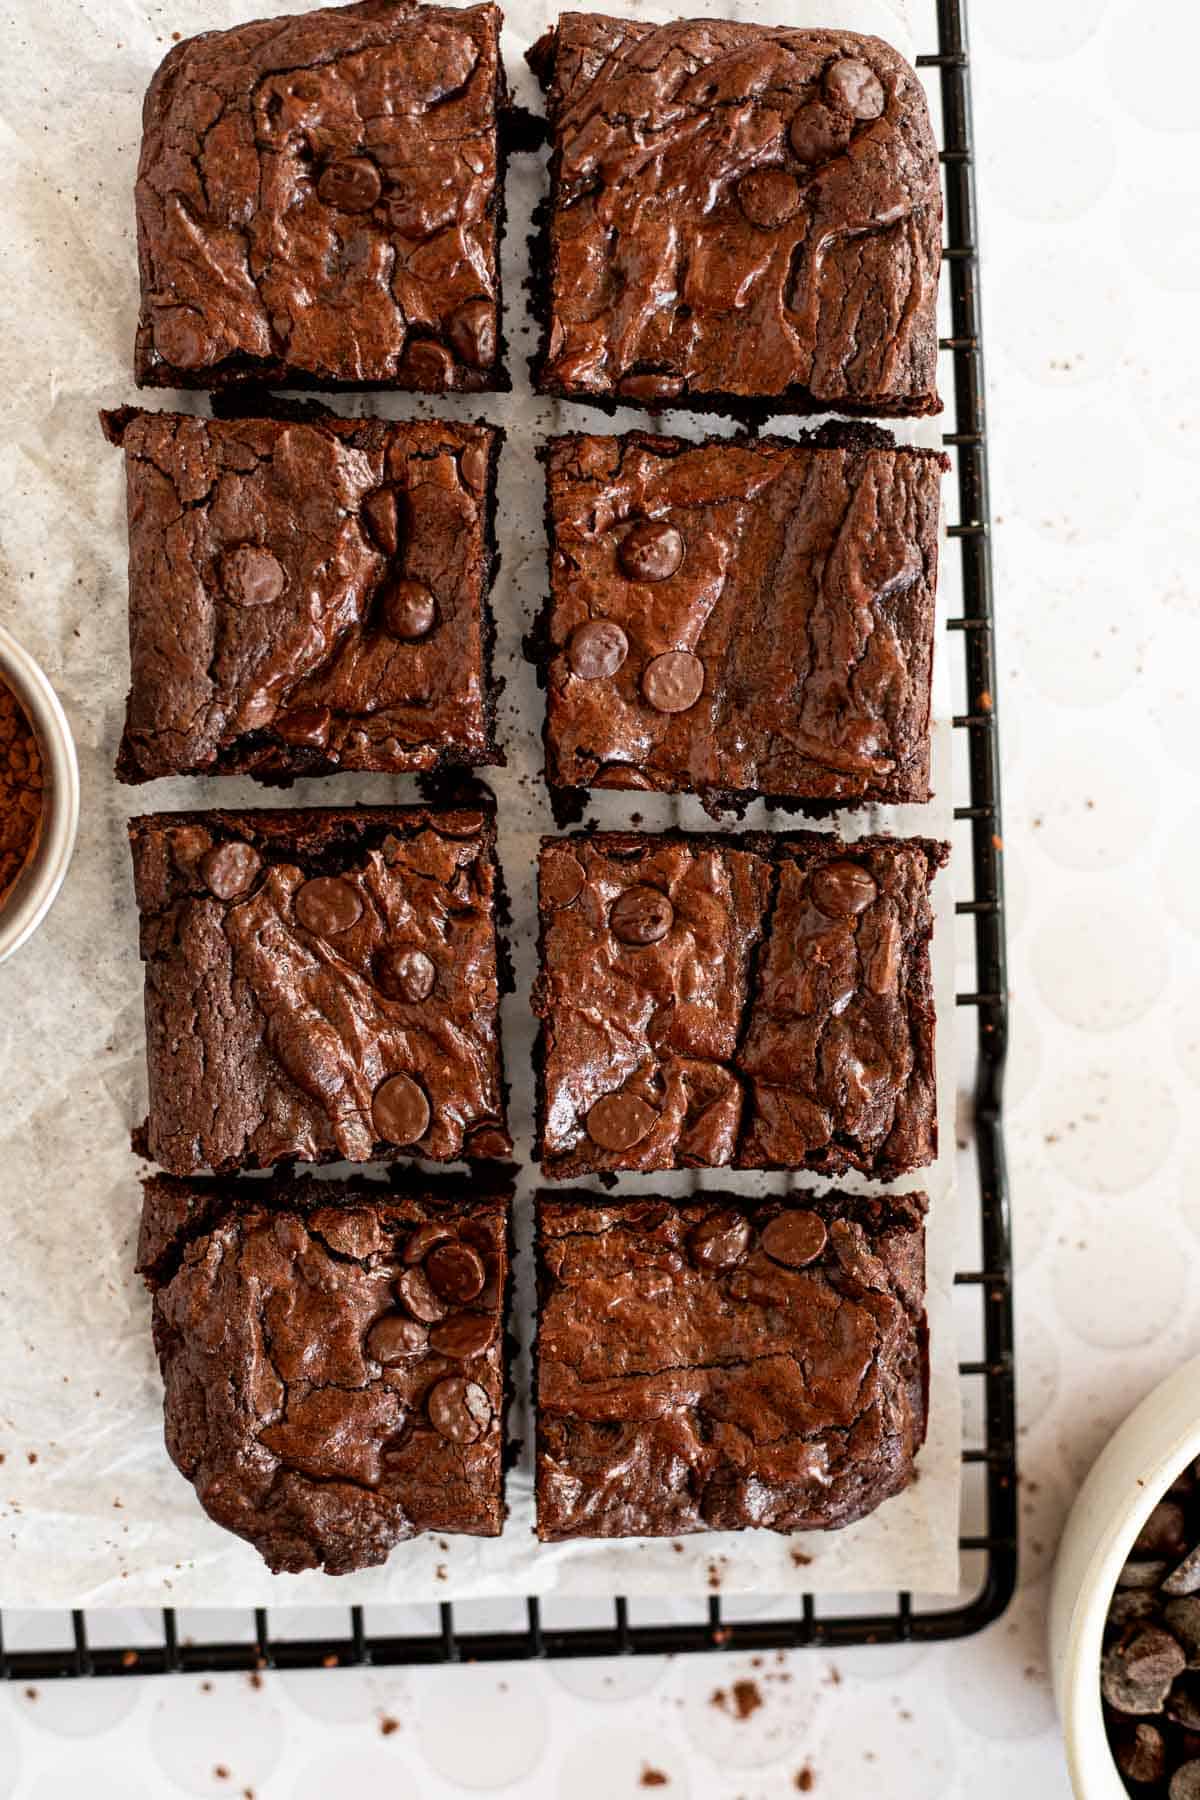 8 brownies cut into squares on parchment paper.